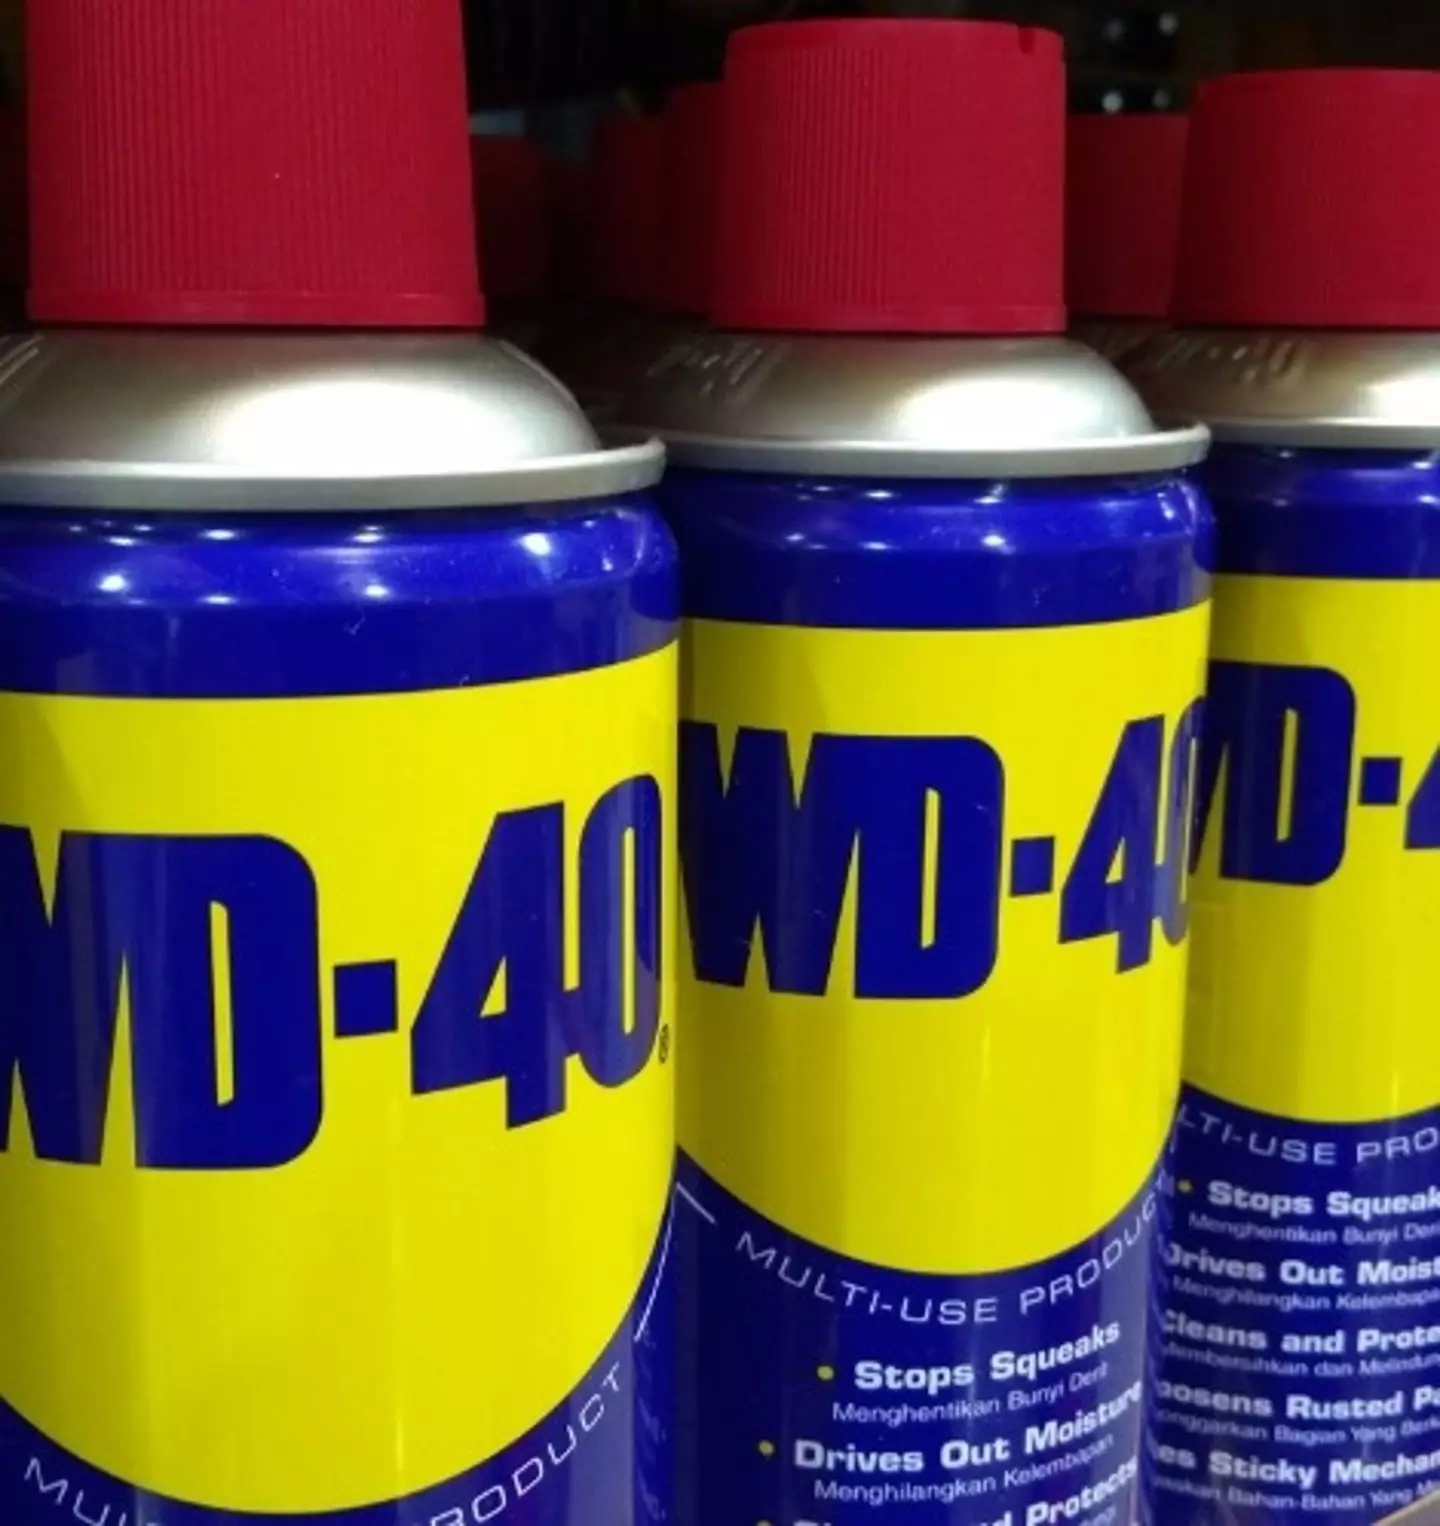 WD-40 is used in 187 countries around the world and has over 2,000 uses.